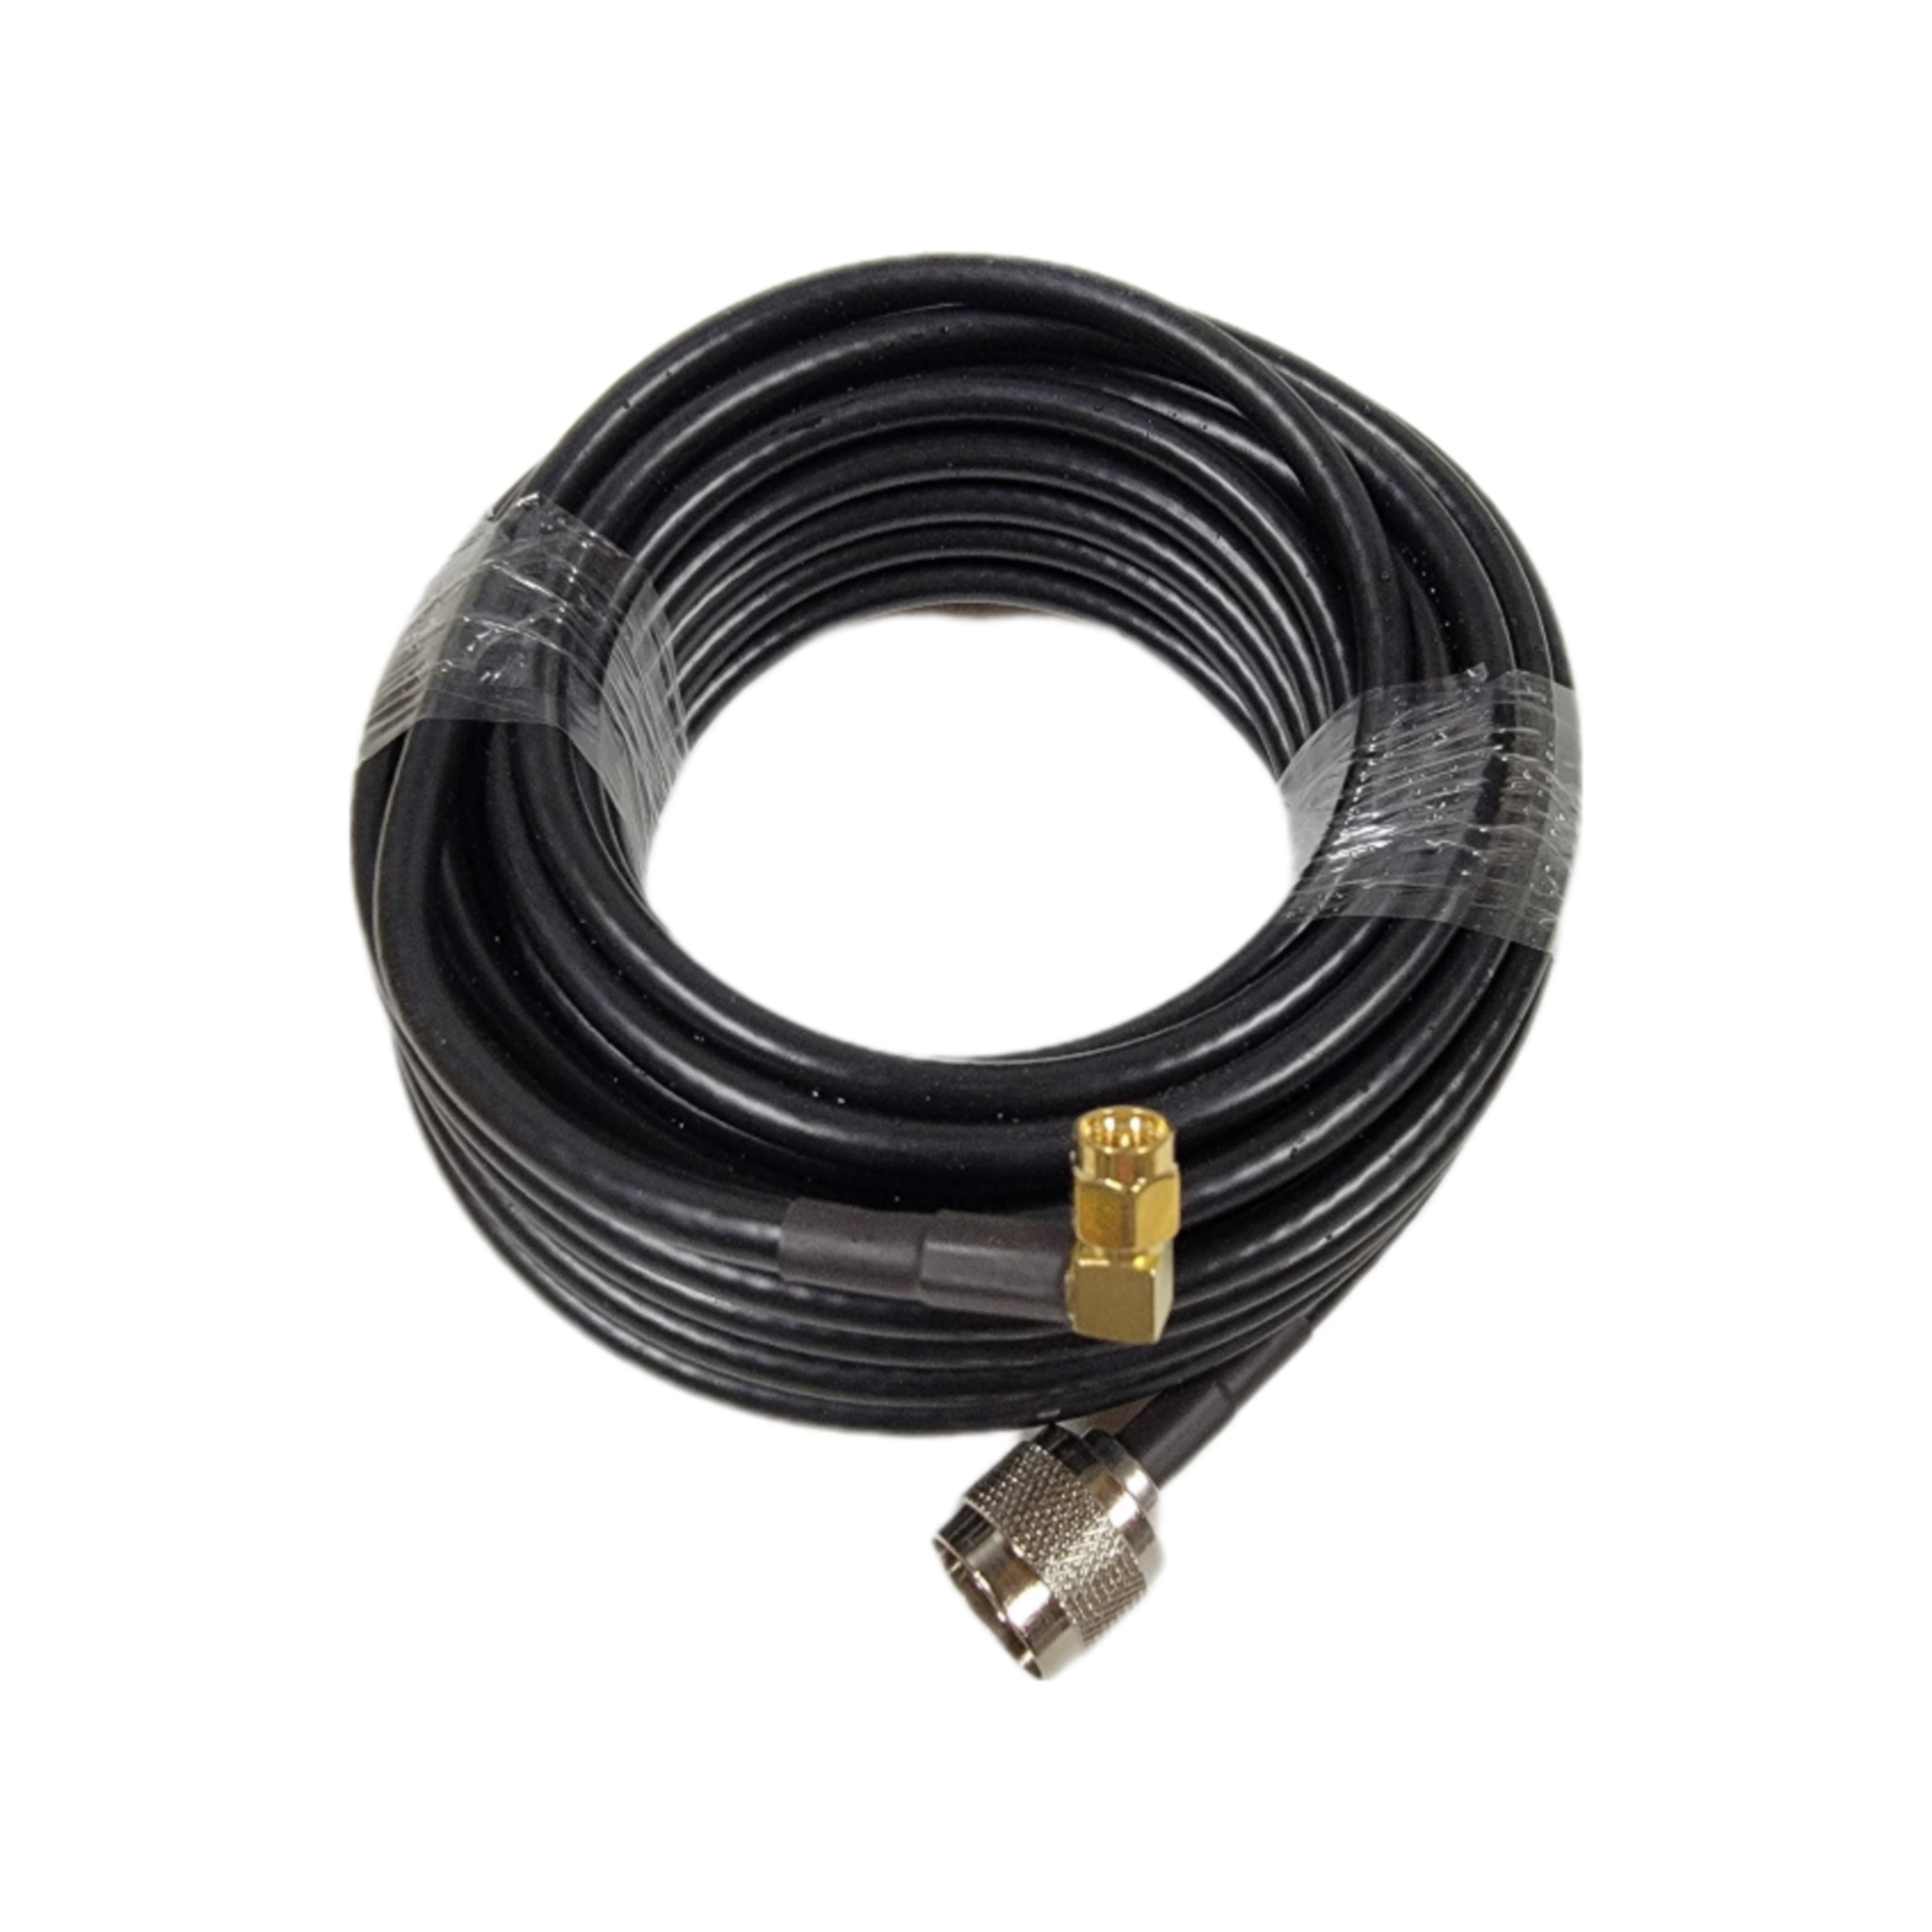 Cellular Trail Camera Antenna Cable 30ft Ultra Low Loss